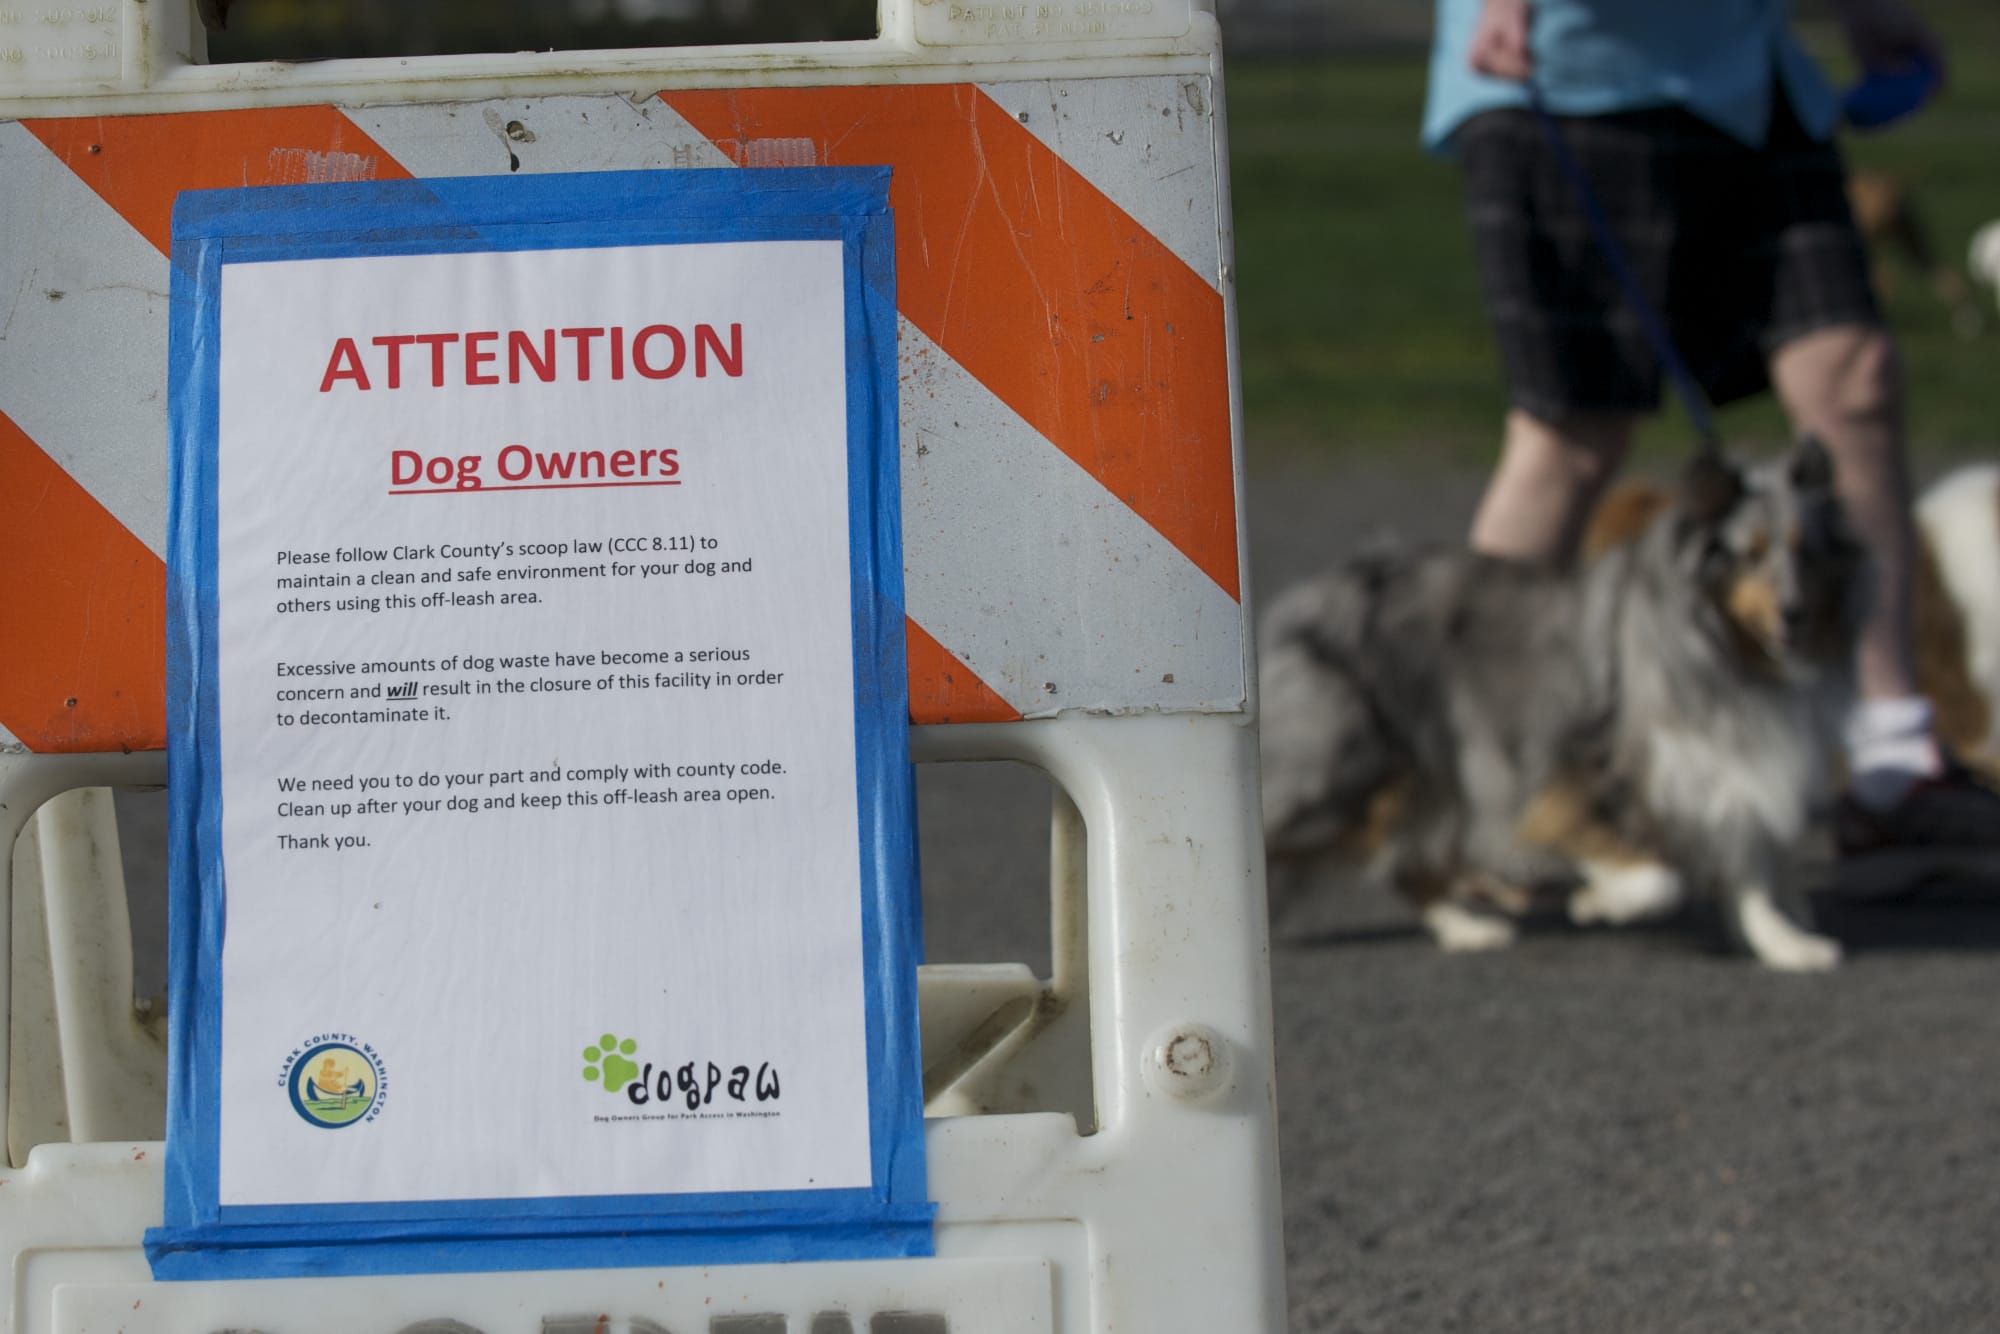 Signs tell dog owners to pick up after their pets, but dog waste at the park remains a problem.